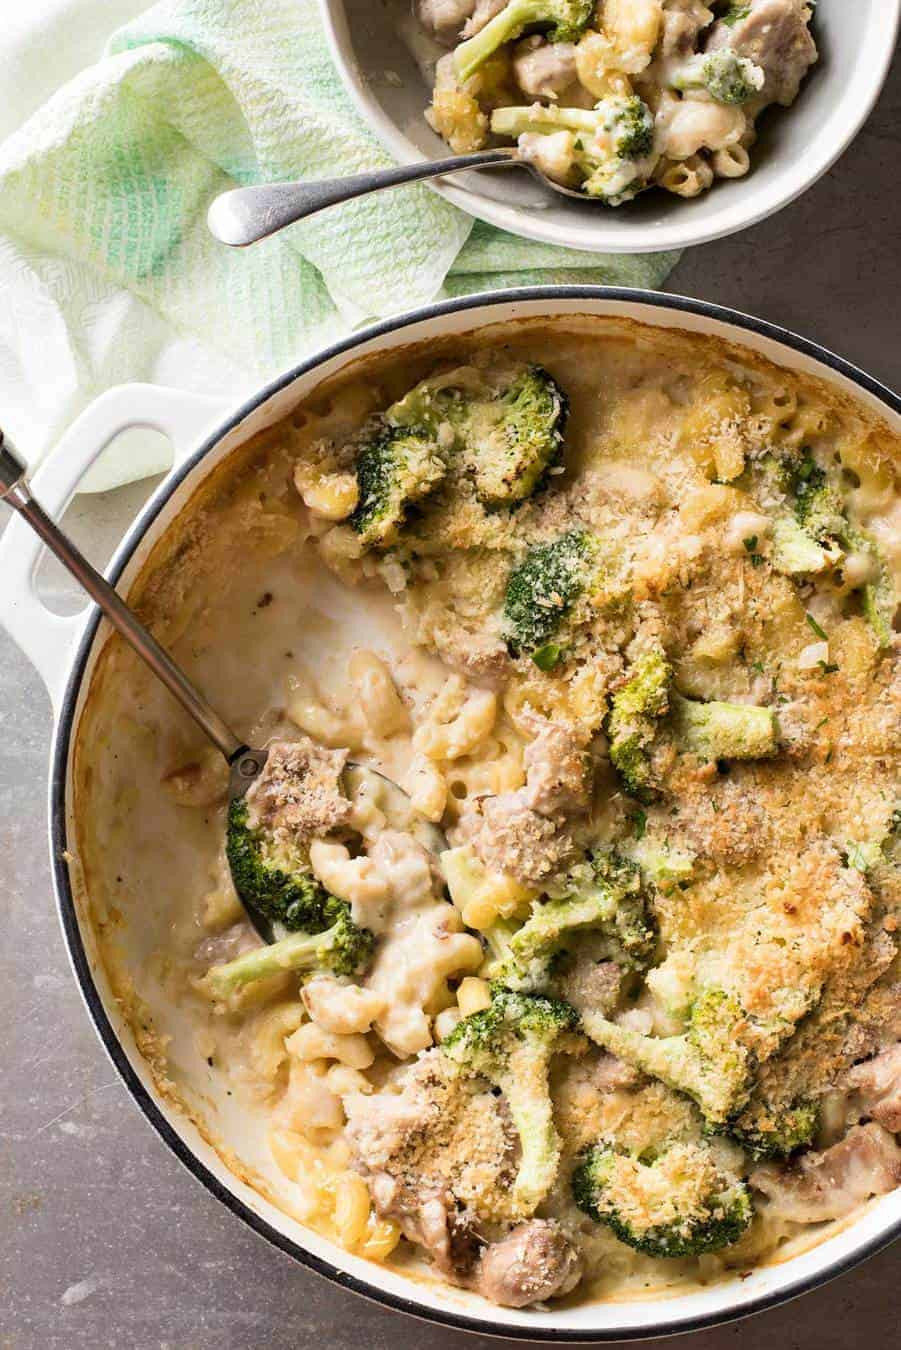 Baked Macaroni And Cheese With Chicken
 Baked Macaroni Cheese with Chicken & BROCCOLI e Pot